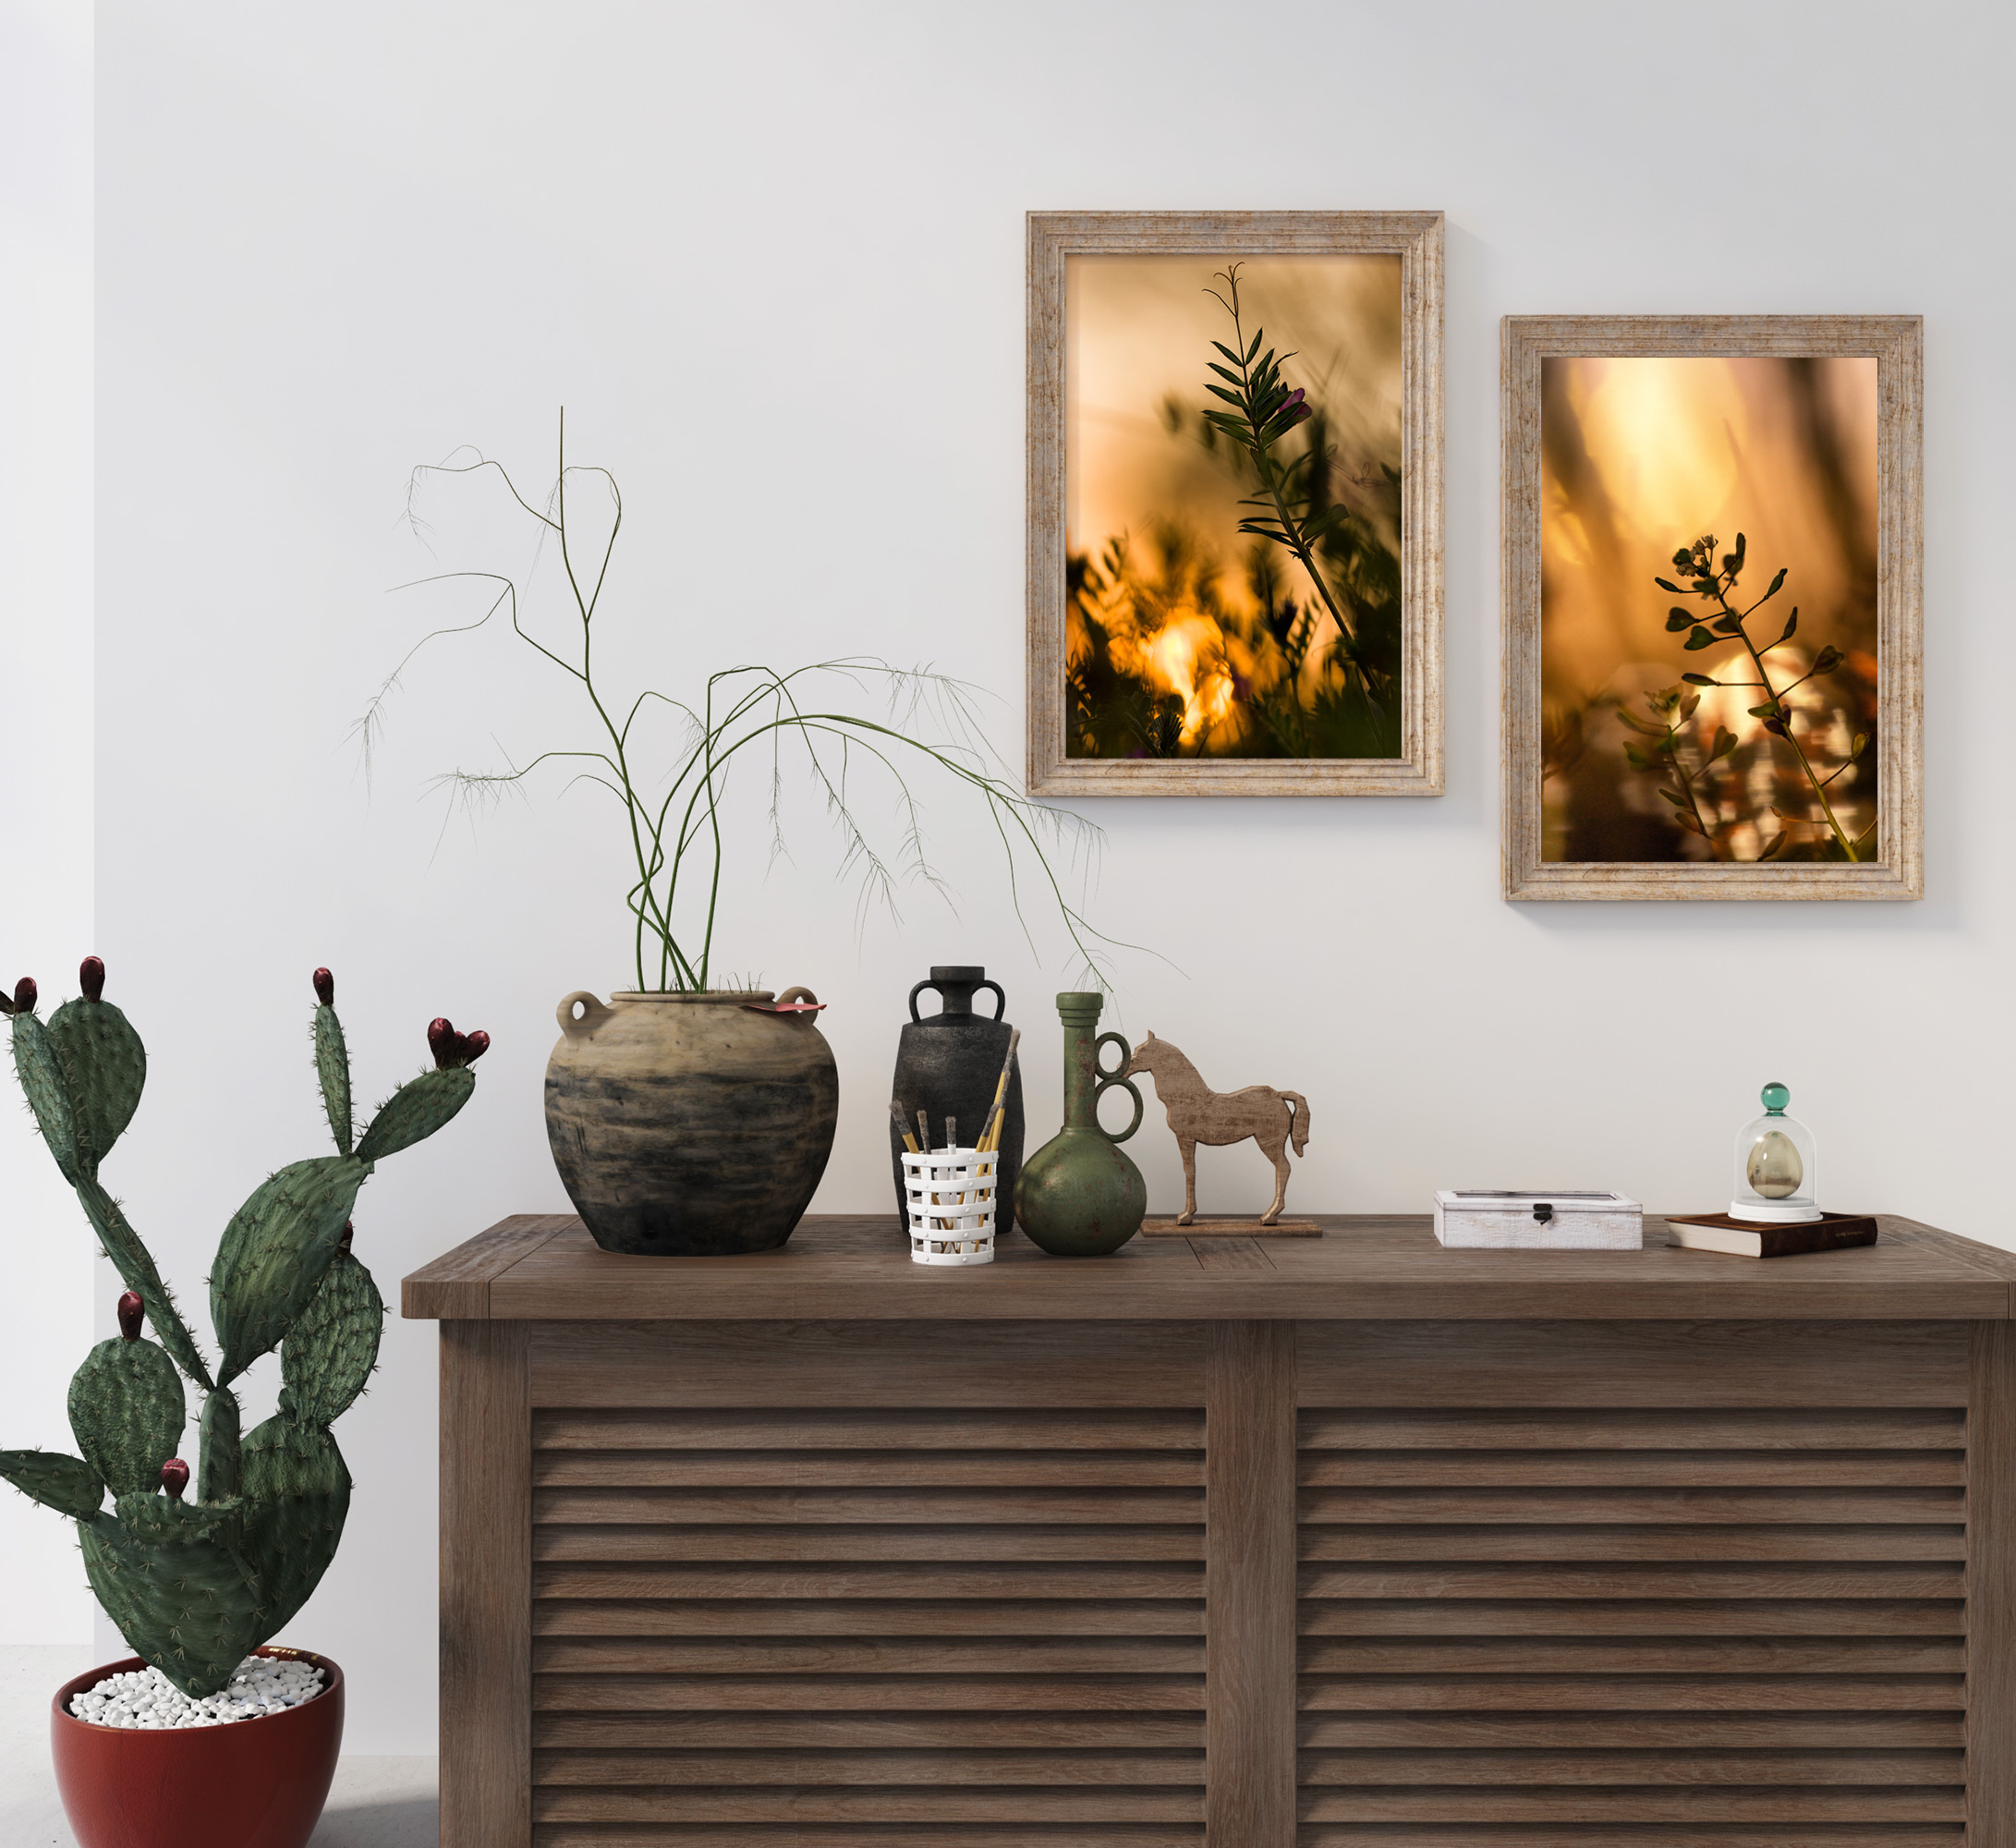 Close-up photographs of Vicia sepium and Shepherd's-Purse flowers framed in light wood frames on a wall. Underneath is a wooden sideboard with vases, potted plants, a cactus, a miniature horse figure, brushes, and a book.